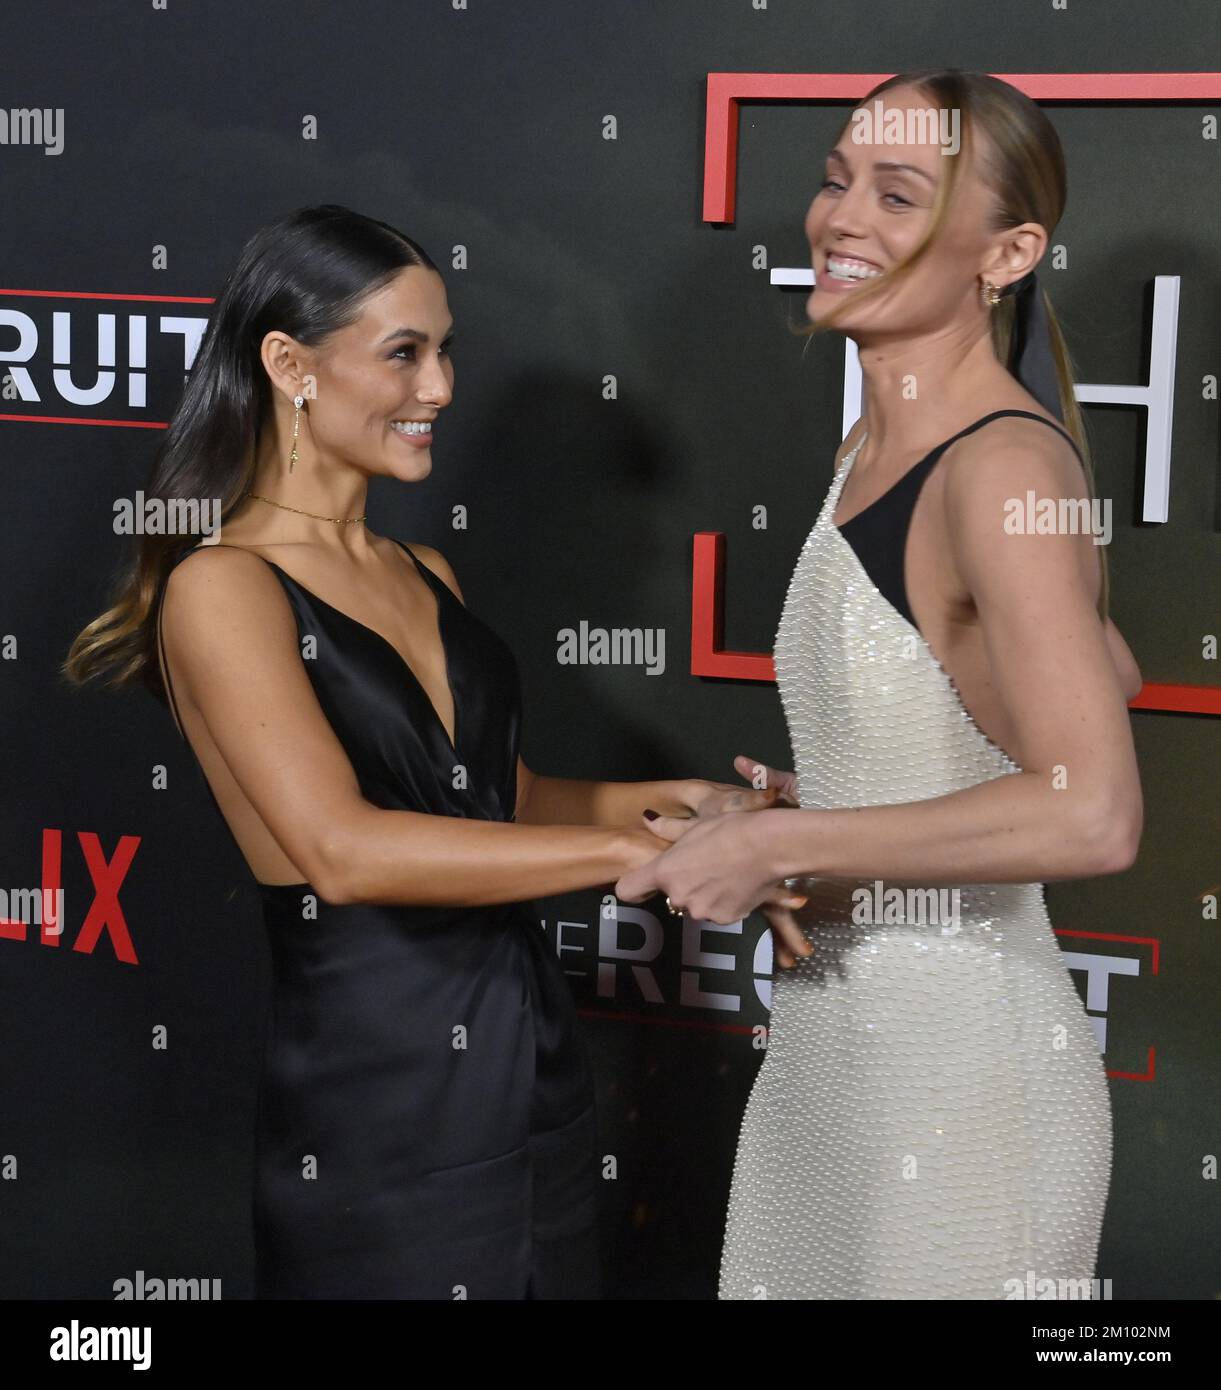 Los Angeles, United States. 08th Dec, 2022. Cast members Fivel Stewart (L) and Laura Haddock attend the premiere of Netflix's new TV series 'The Recruit' at the AMC Grove in Los Angeles on Thursday, December 8, 2022. Storyline: Follows a lawyer at the CIA who gets entangled in dangerous international power politics when a former asset threatens to expose the nature of her long-term relationship with the agency. Photo by Jim Ruymen/UPI Credit: UPI/Alamy Live News Stock Photo